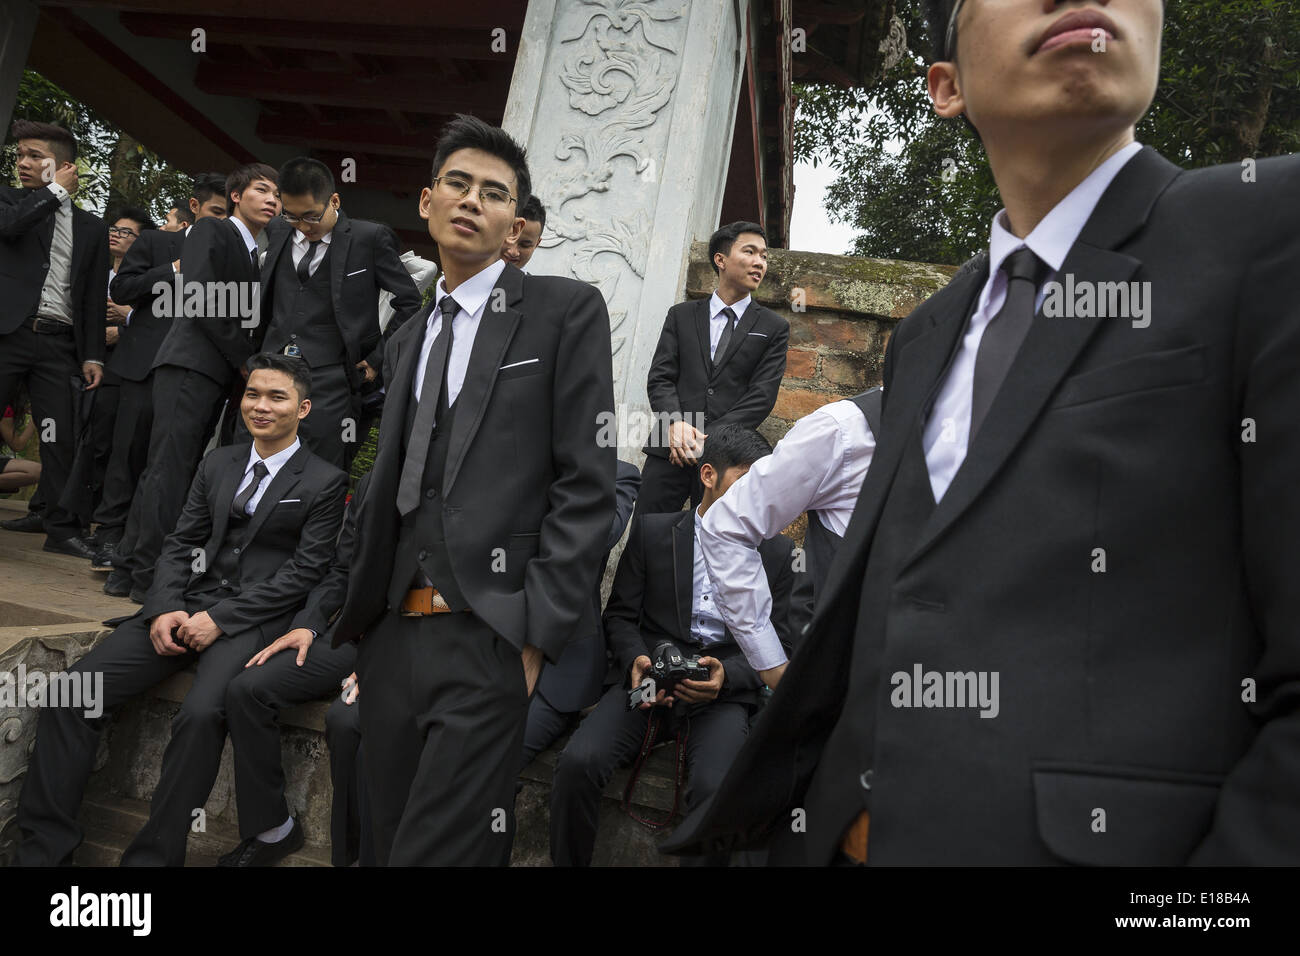 A group of young people wearing in suits waiting to participate in a photo shoot. Stock Photo